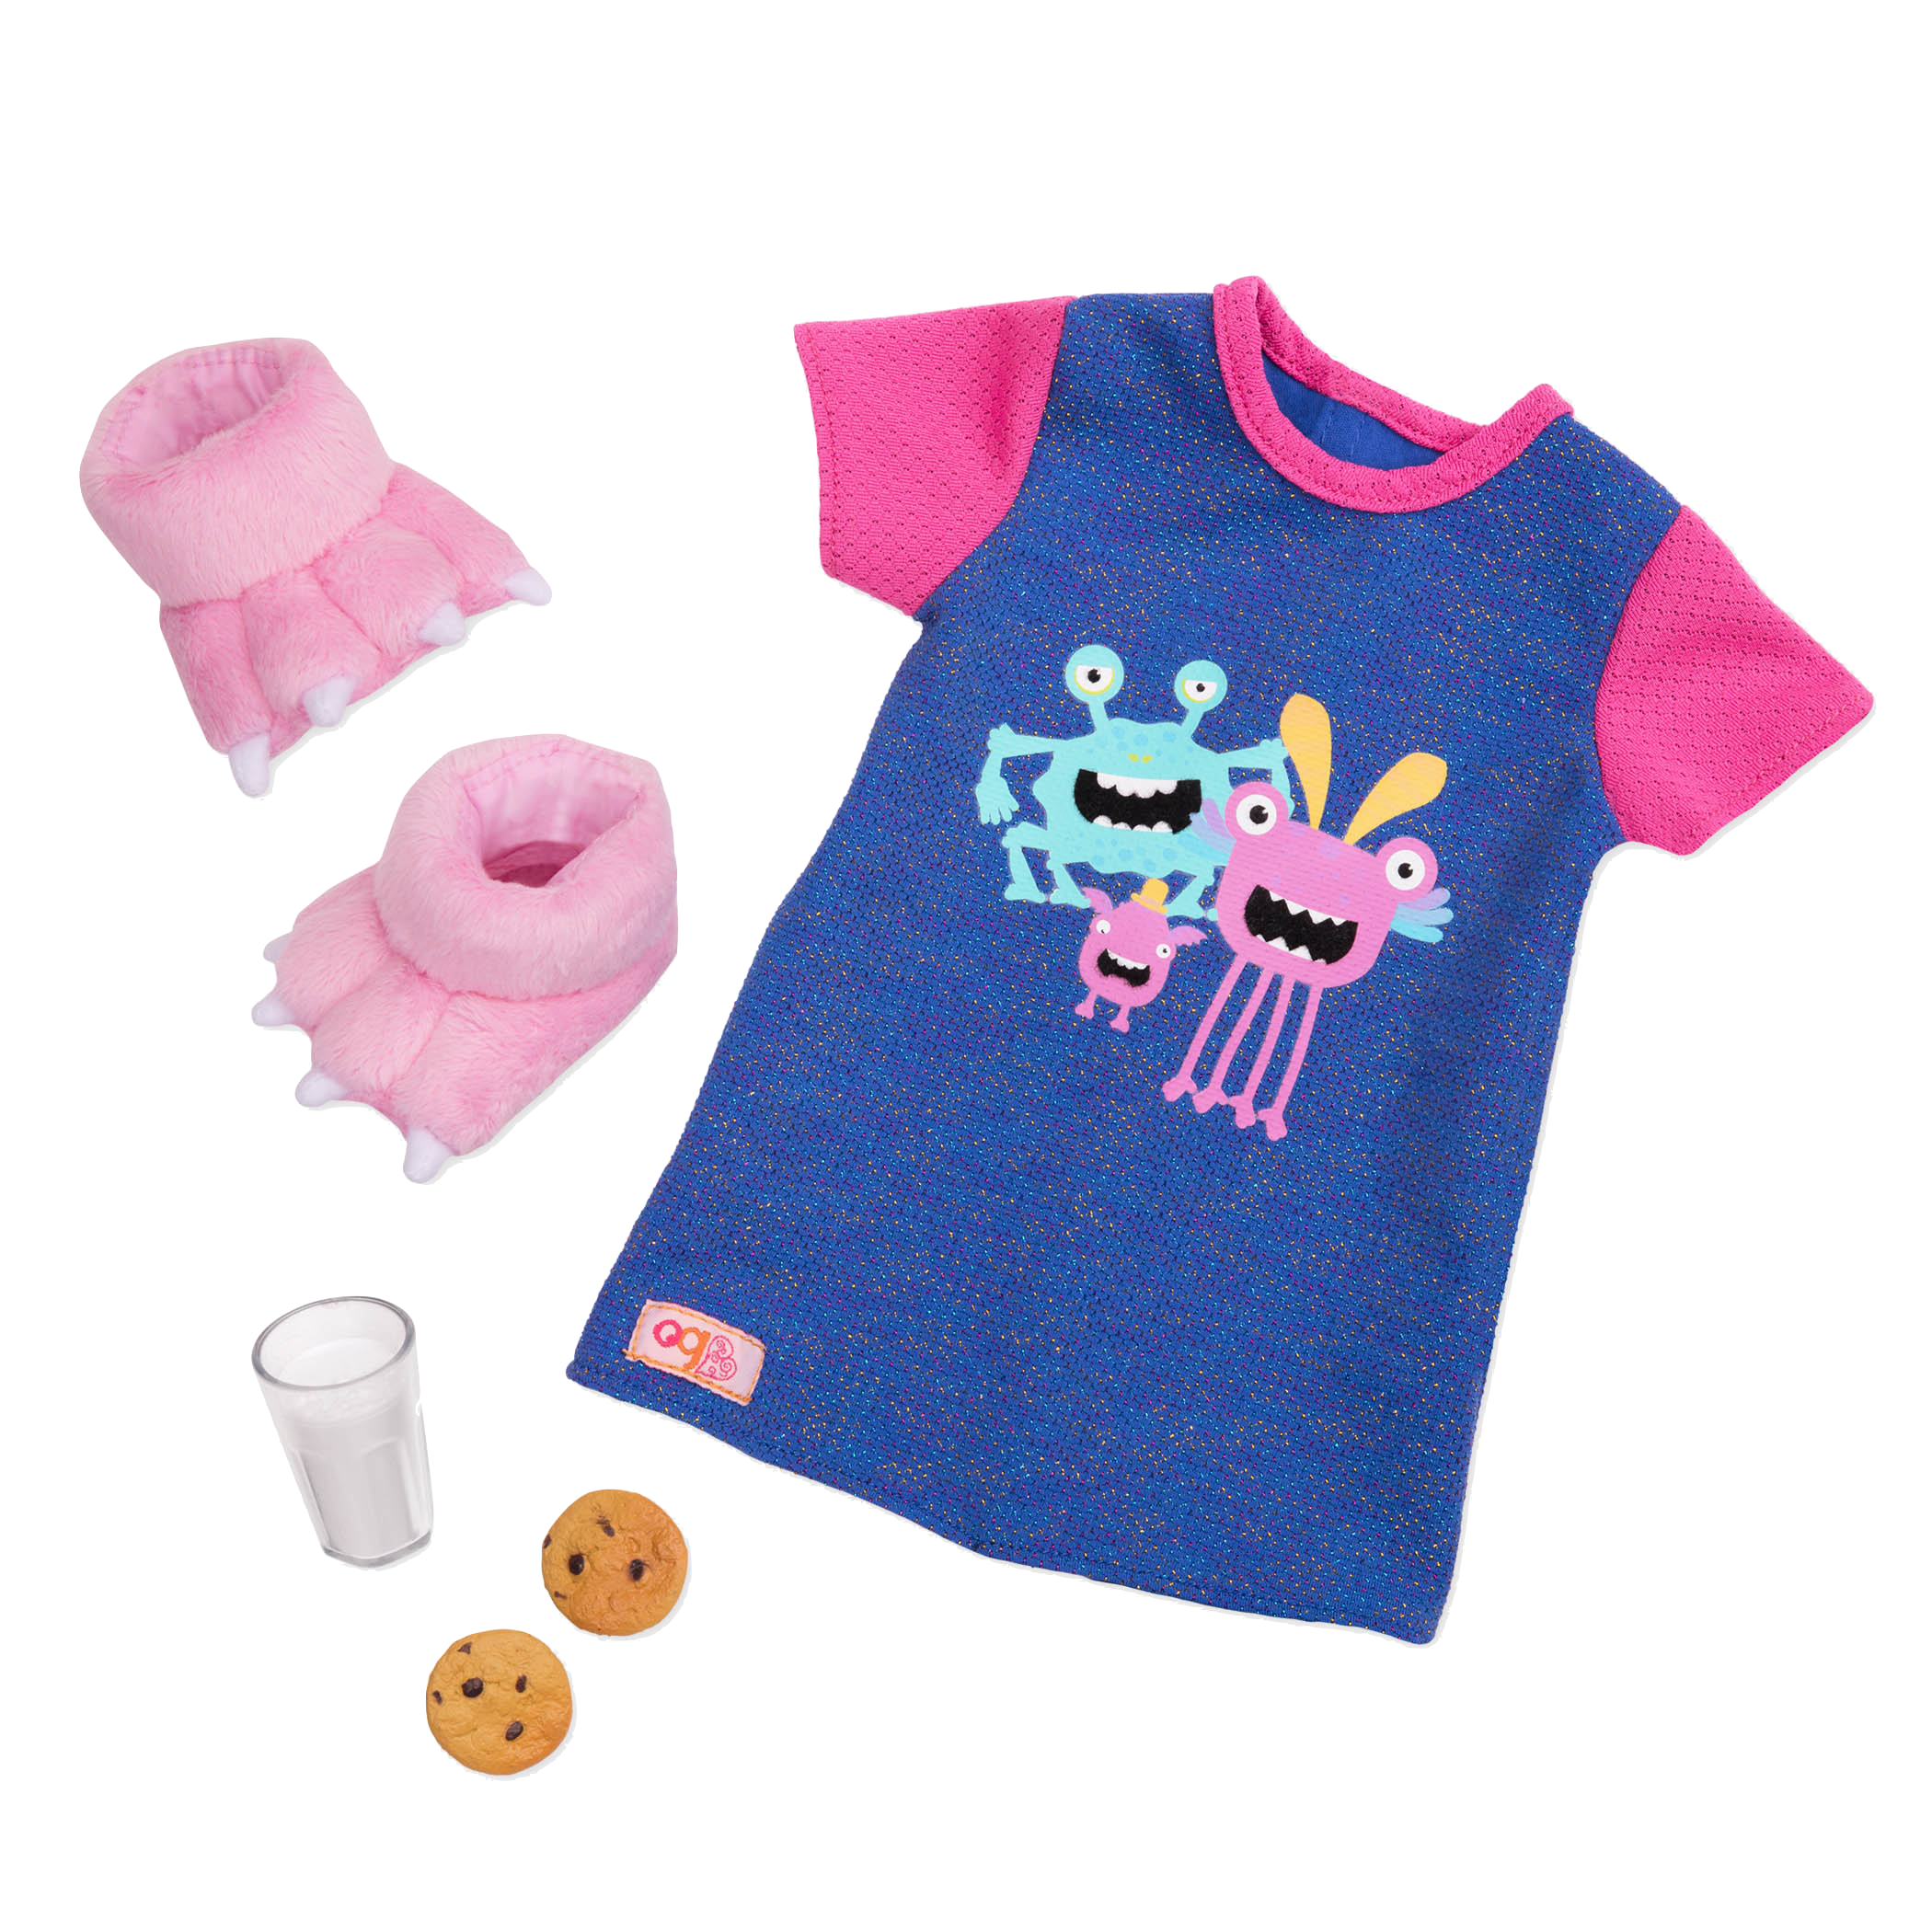 Snuggle Monster Pajama Outfit for 18-inch Dolls